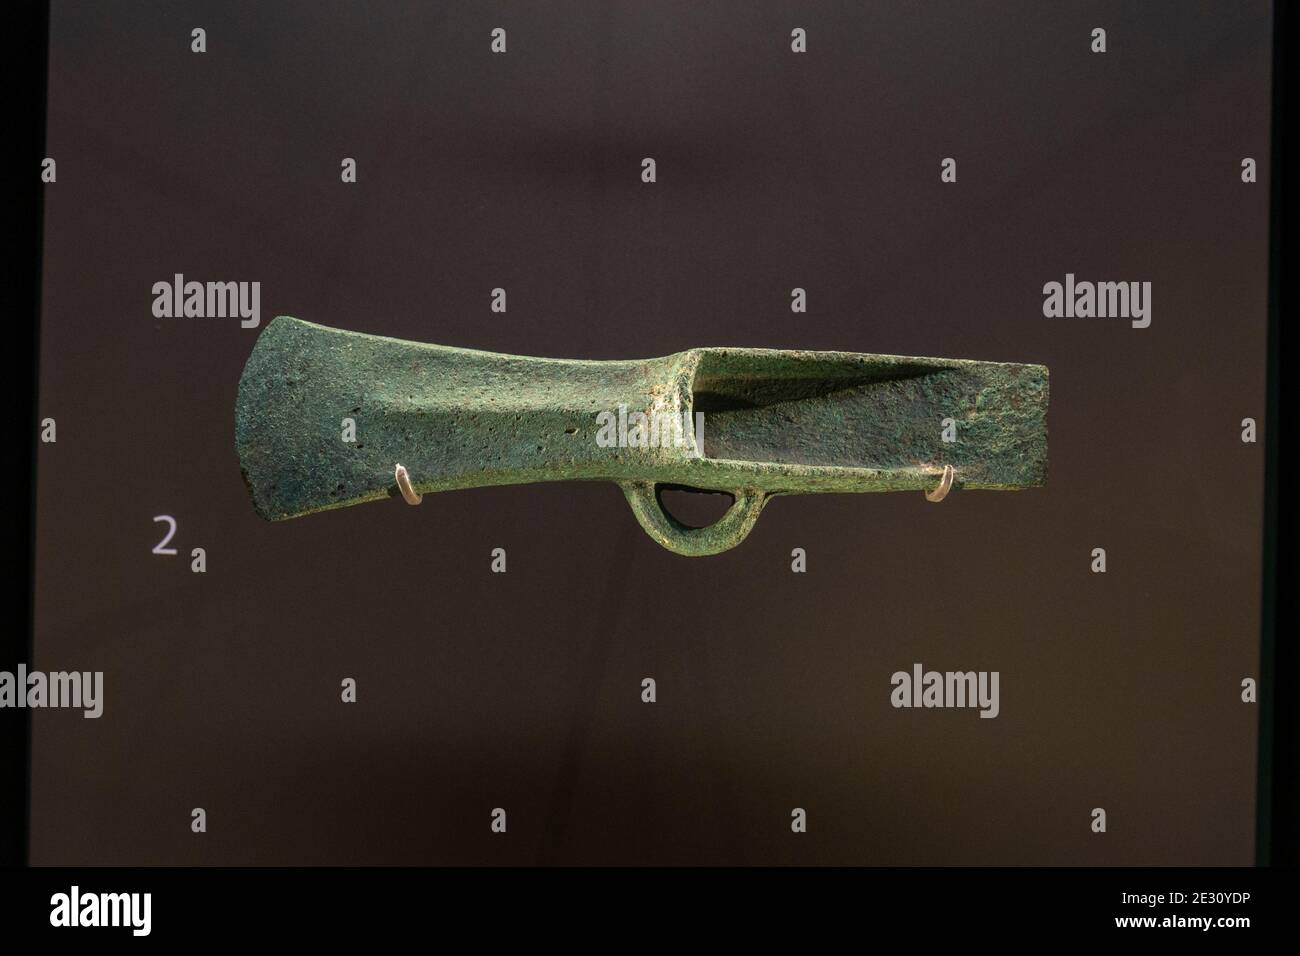 A copper alloy axe (called a palstave) found in a Bronze Age (10300-1000BC) hoard near Monkton Deverill, Salisbury Museum, Salisbury, Wiltshire, UK. Stock Photo